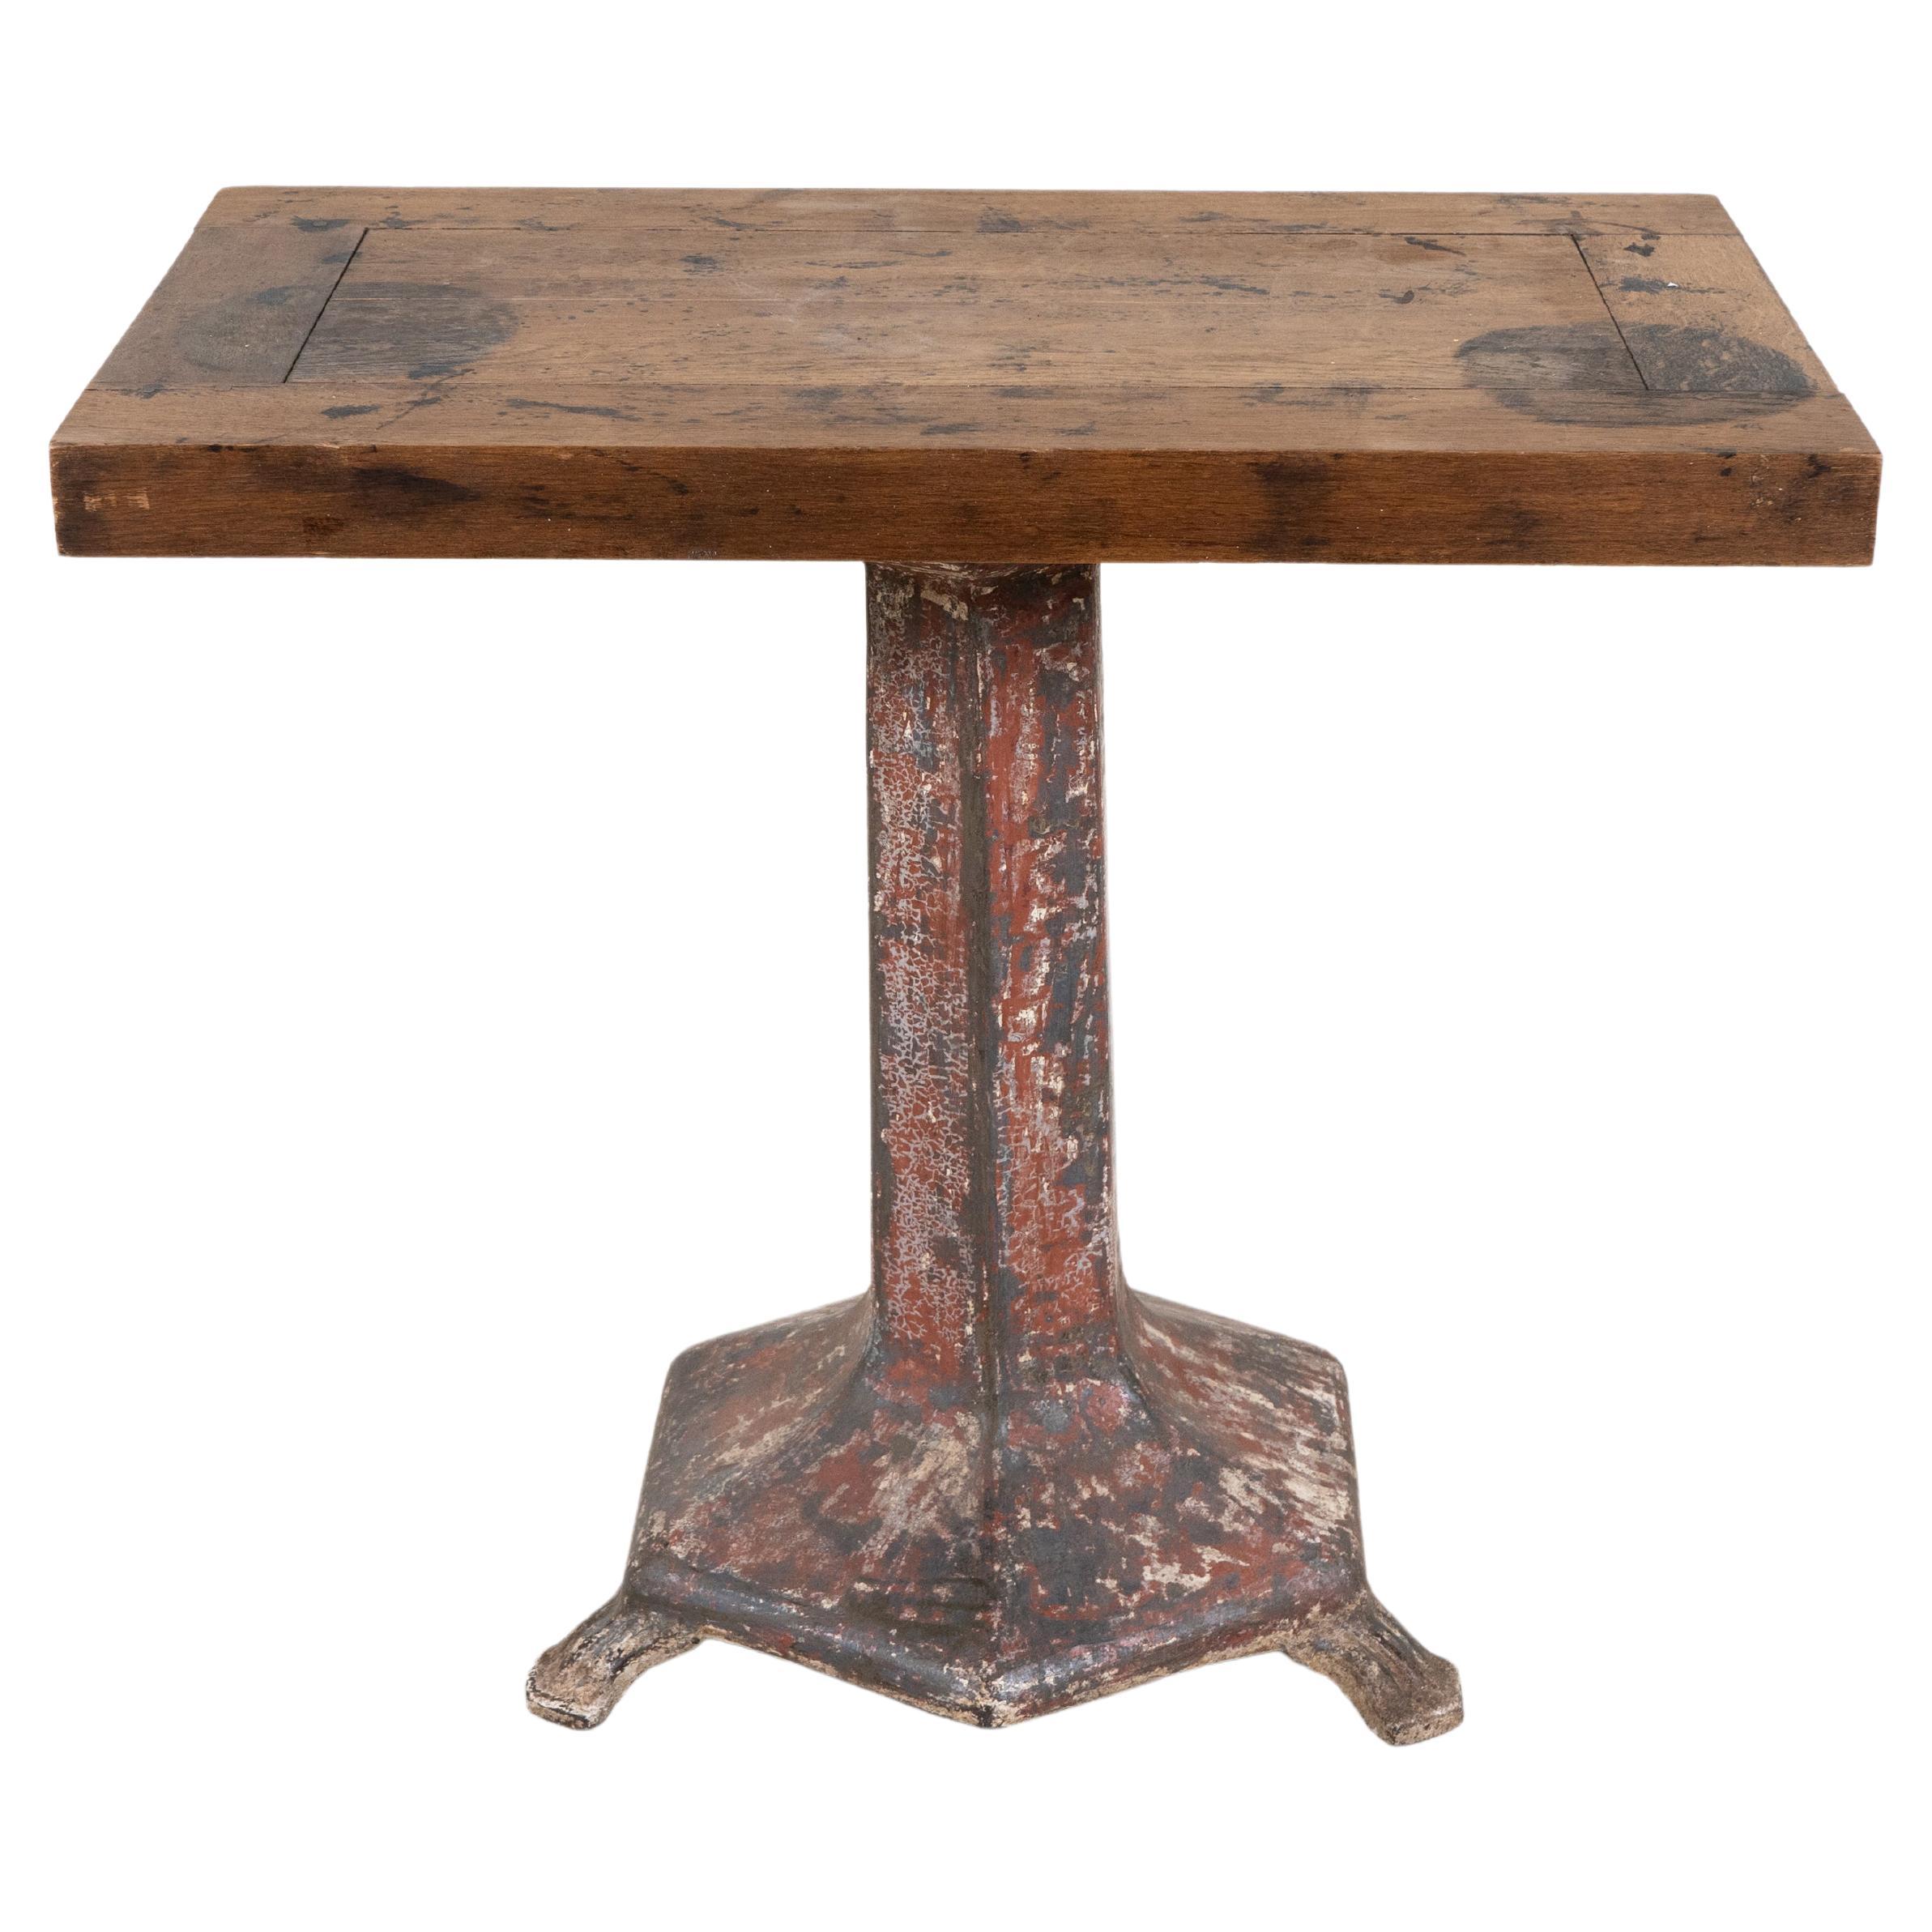 A French Industrial Table with Iron Base, c.1930